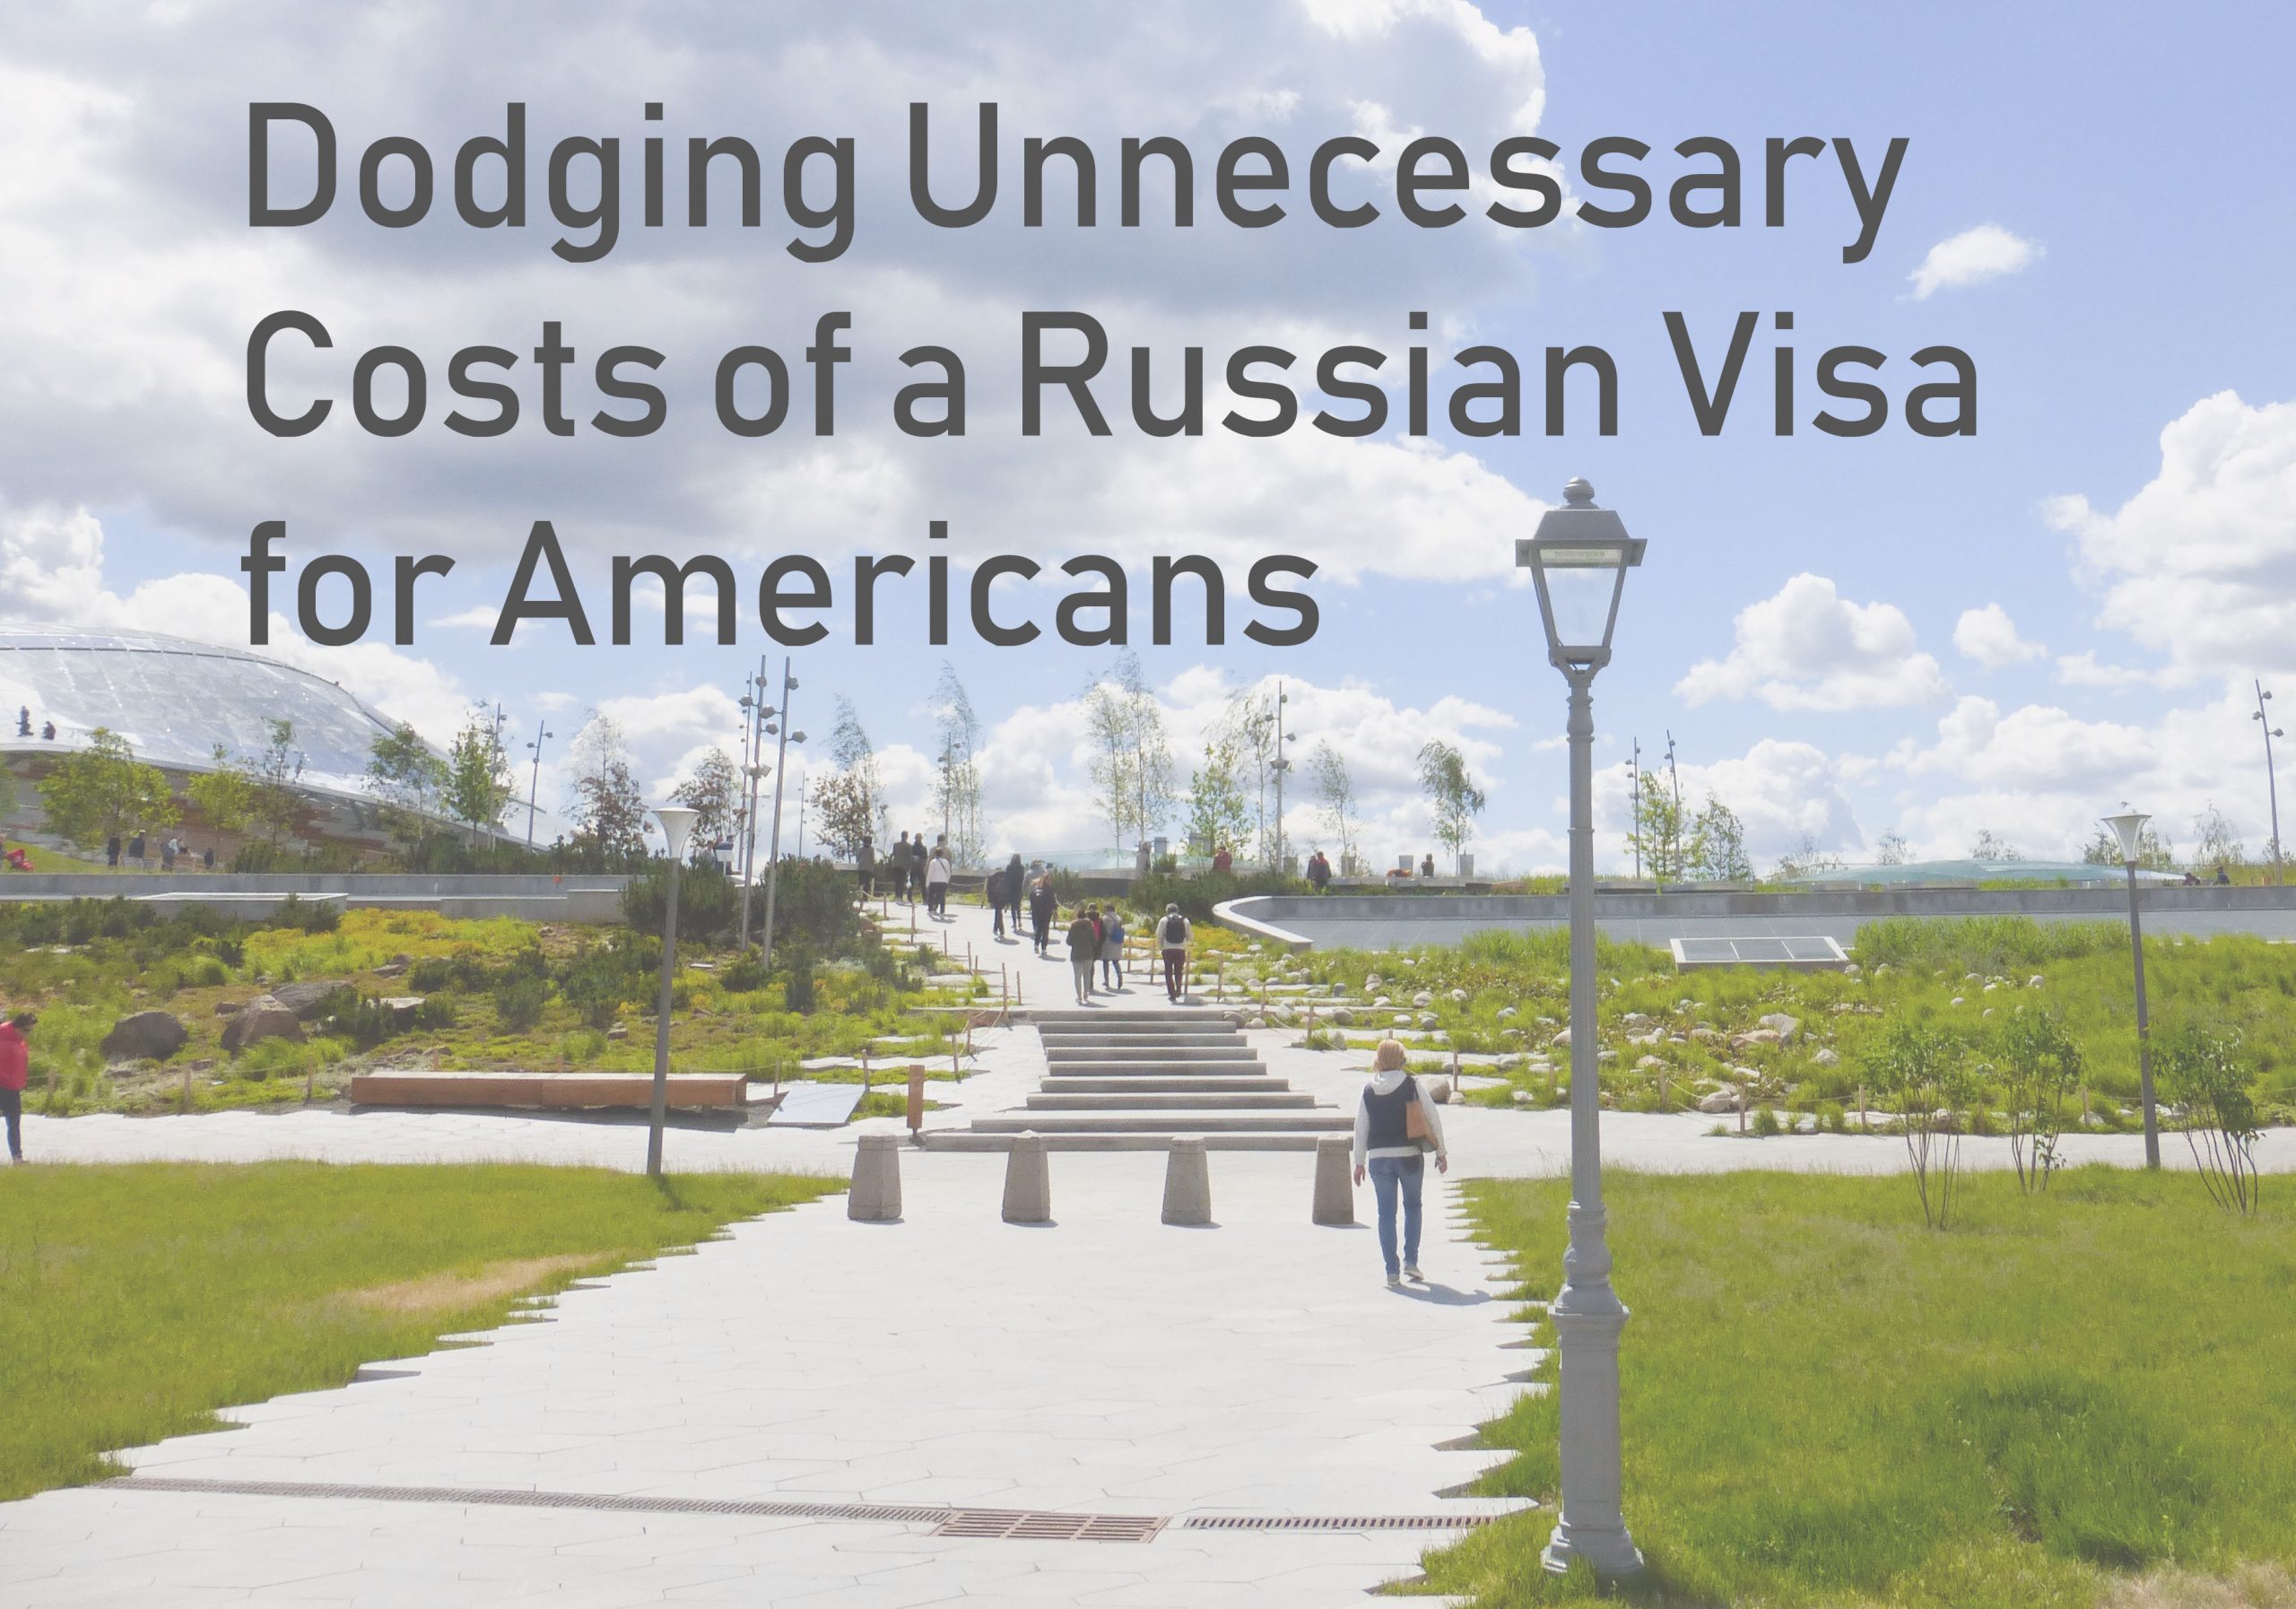 Dodging Unnecessary Costs of a Russian Visa for Americans